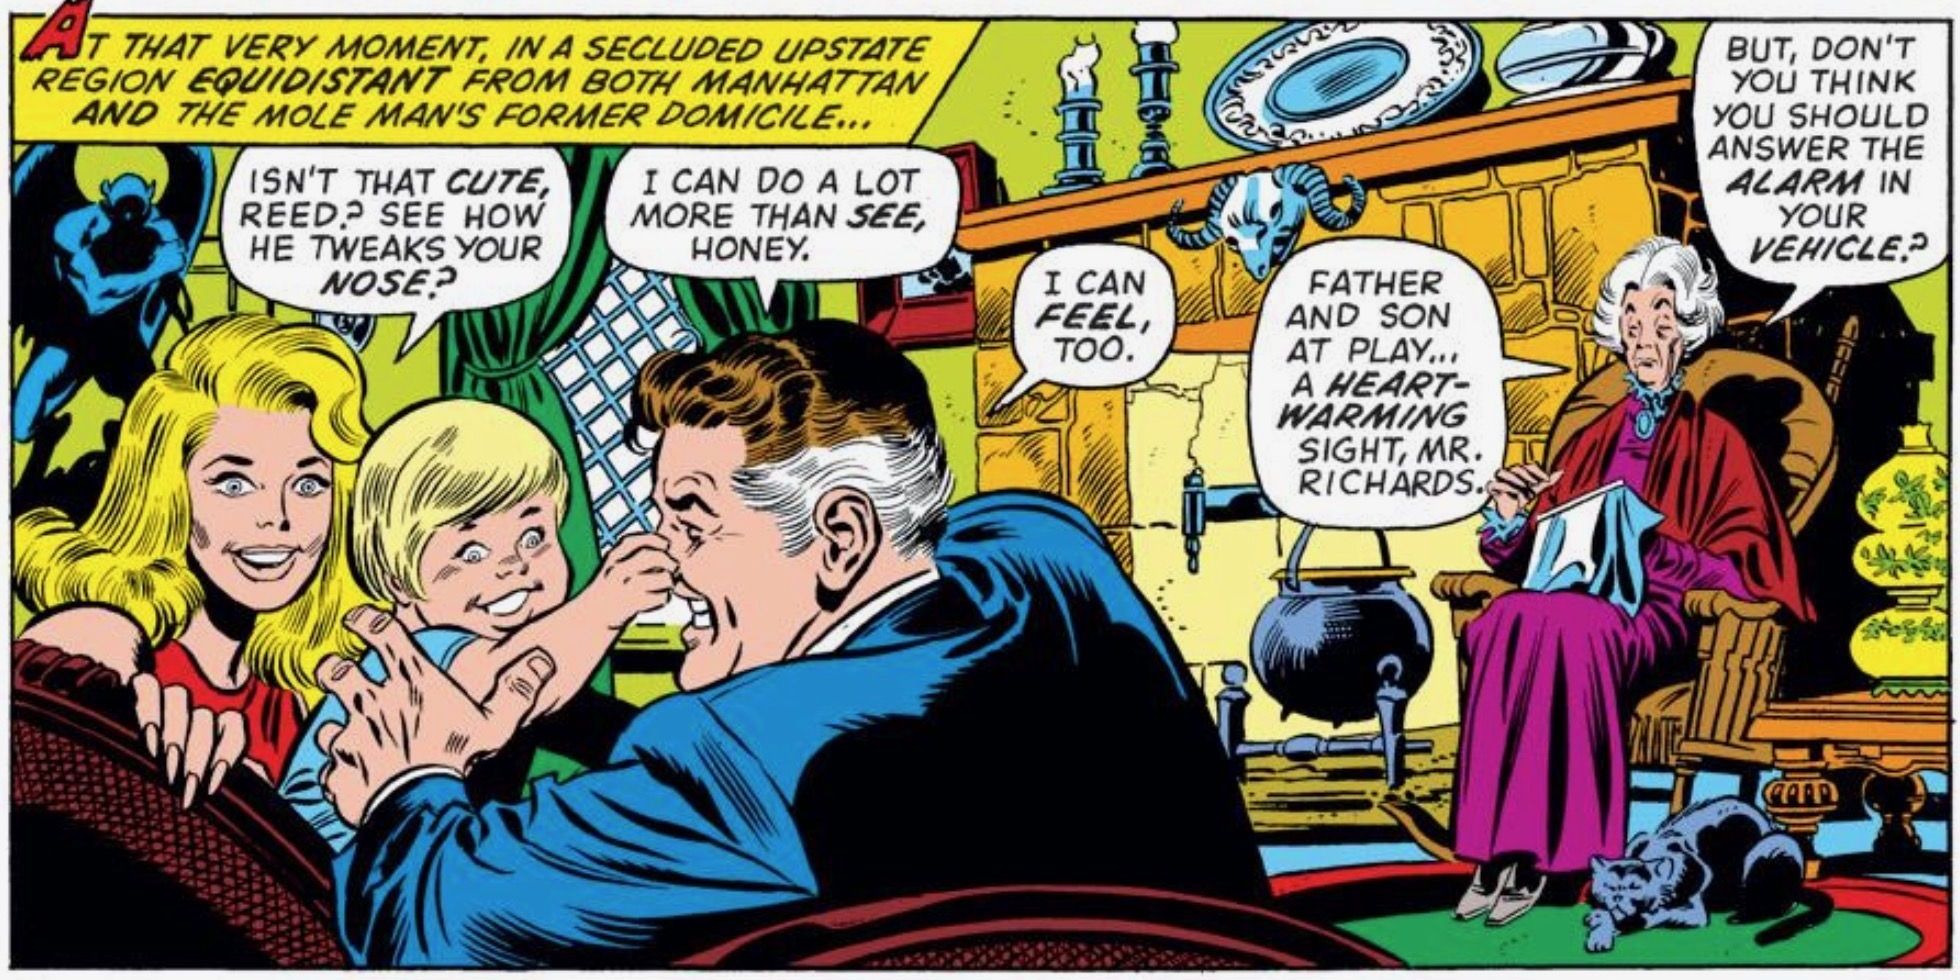 Agatha Harkness in the Fantastic Four comics